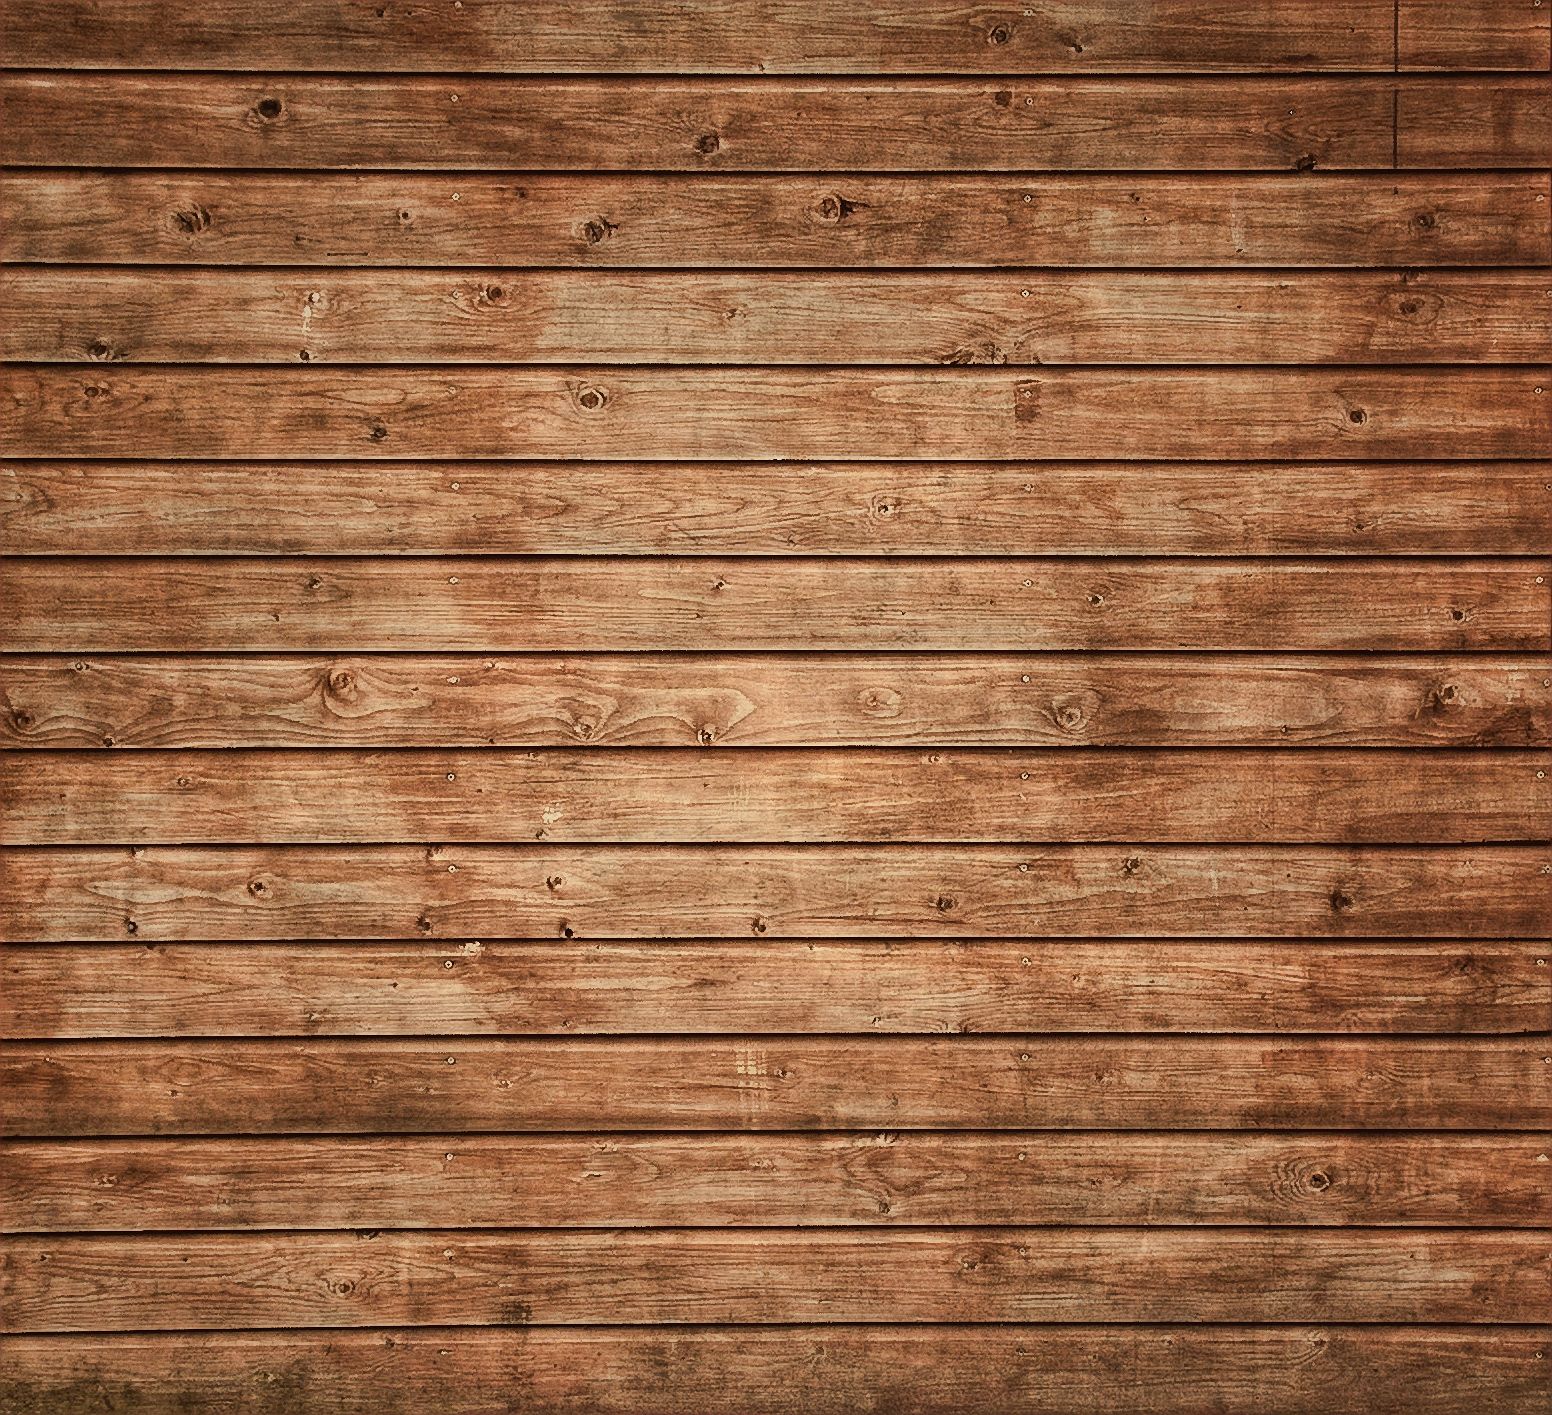 Textures Wallpaper Free Wood Texture Grunge Wood Township Of Texas